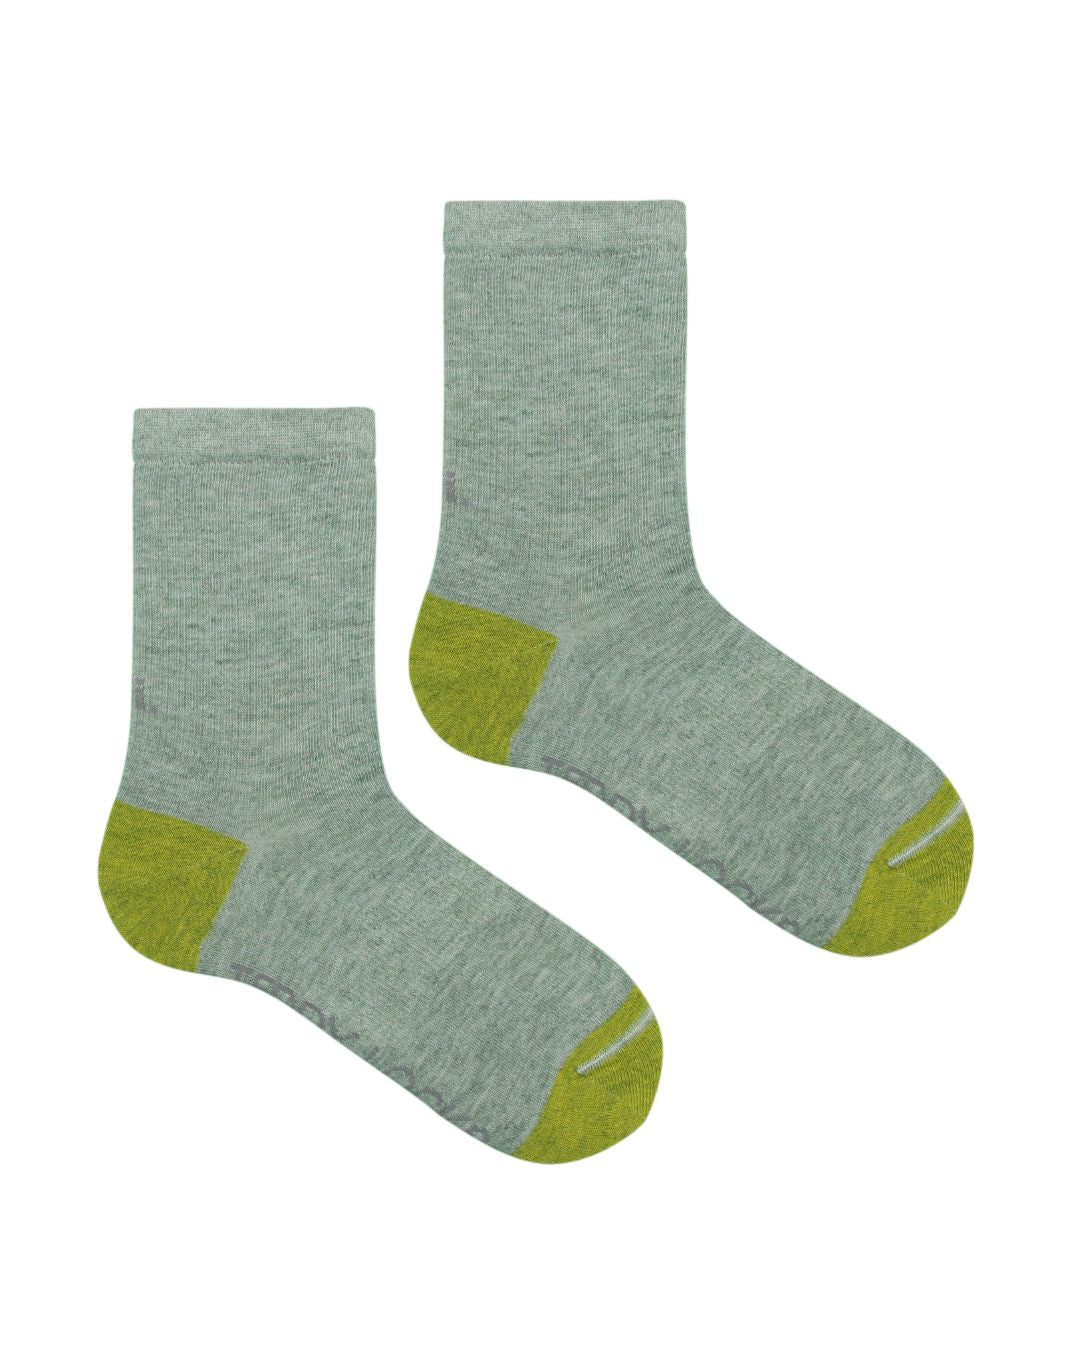 Seagrass green moss green ribbed crew sock. Sport sock, athletic sock, welly sock